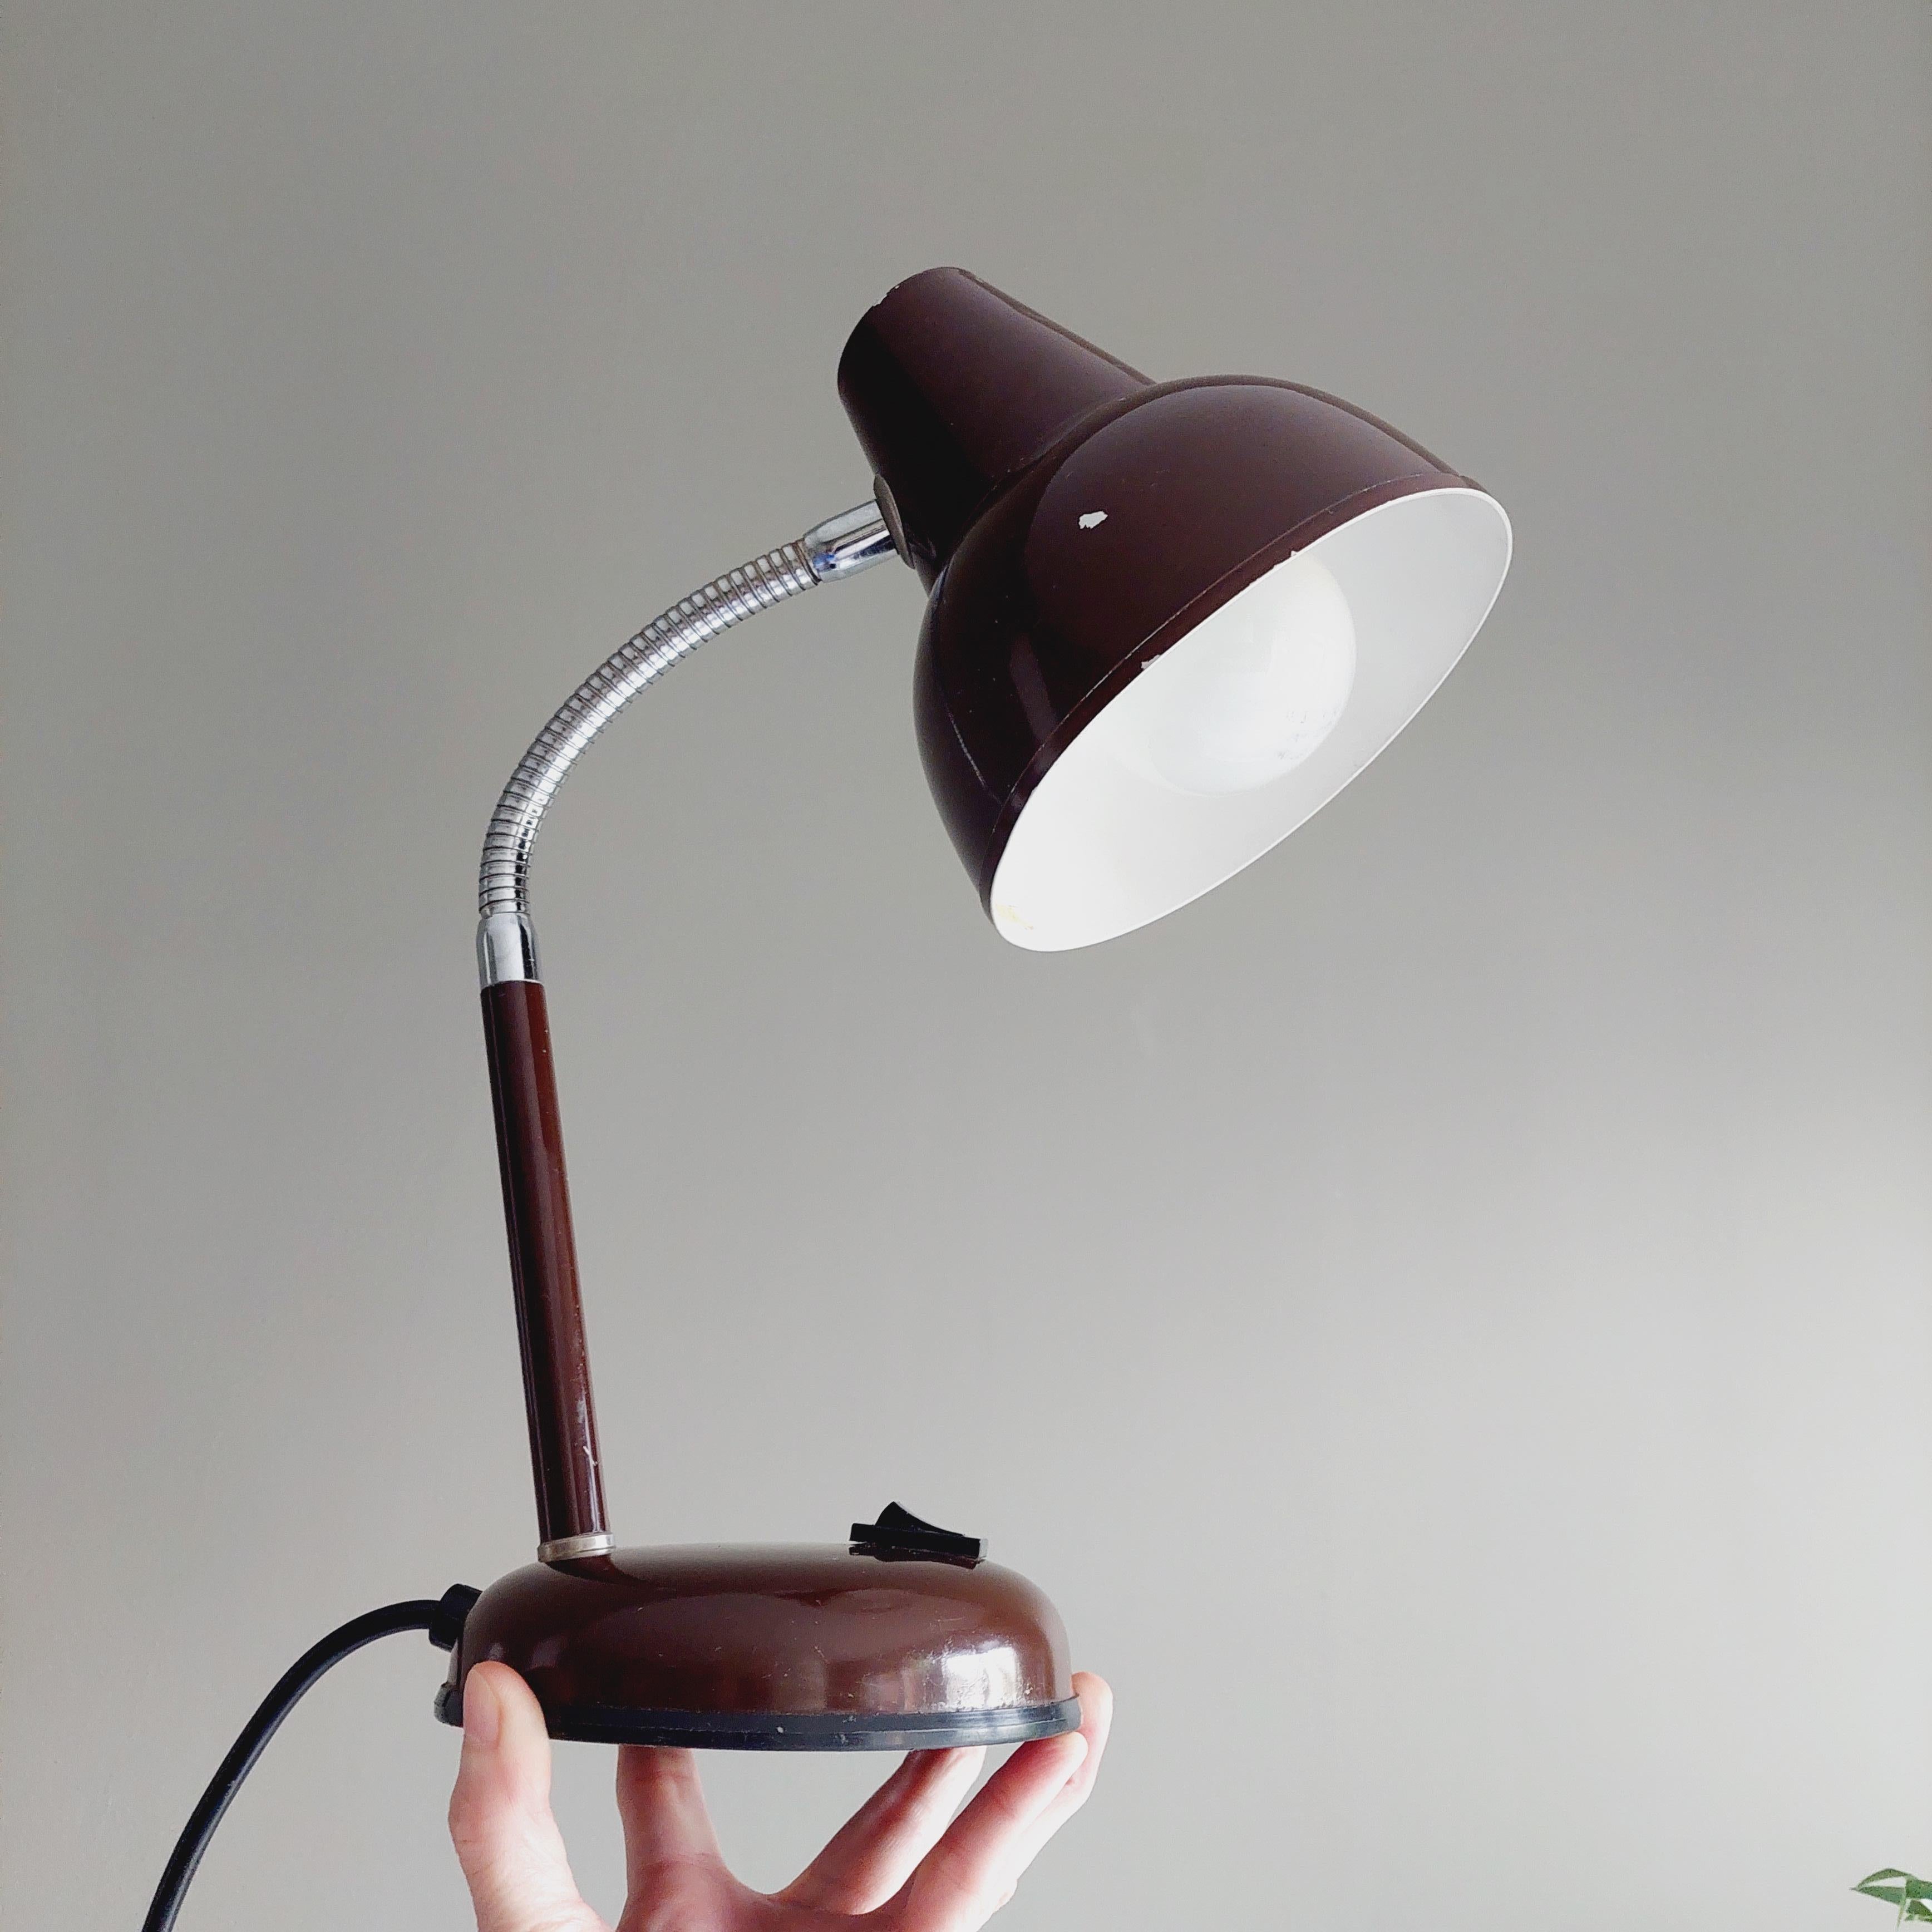 1970s Retro Desk Lamp Made in Italy by Veneta Lumi for BHS in the UK - original label on base. 
Vintage brown metal desk lamp Bauhaus style mid-century

Brown painted metal shade and base.
Goose nek, flexible chrome metal stem. 
Switch part-way down